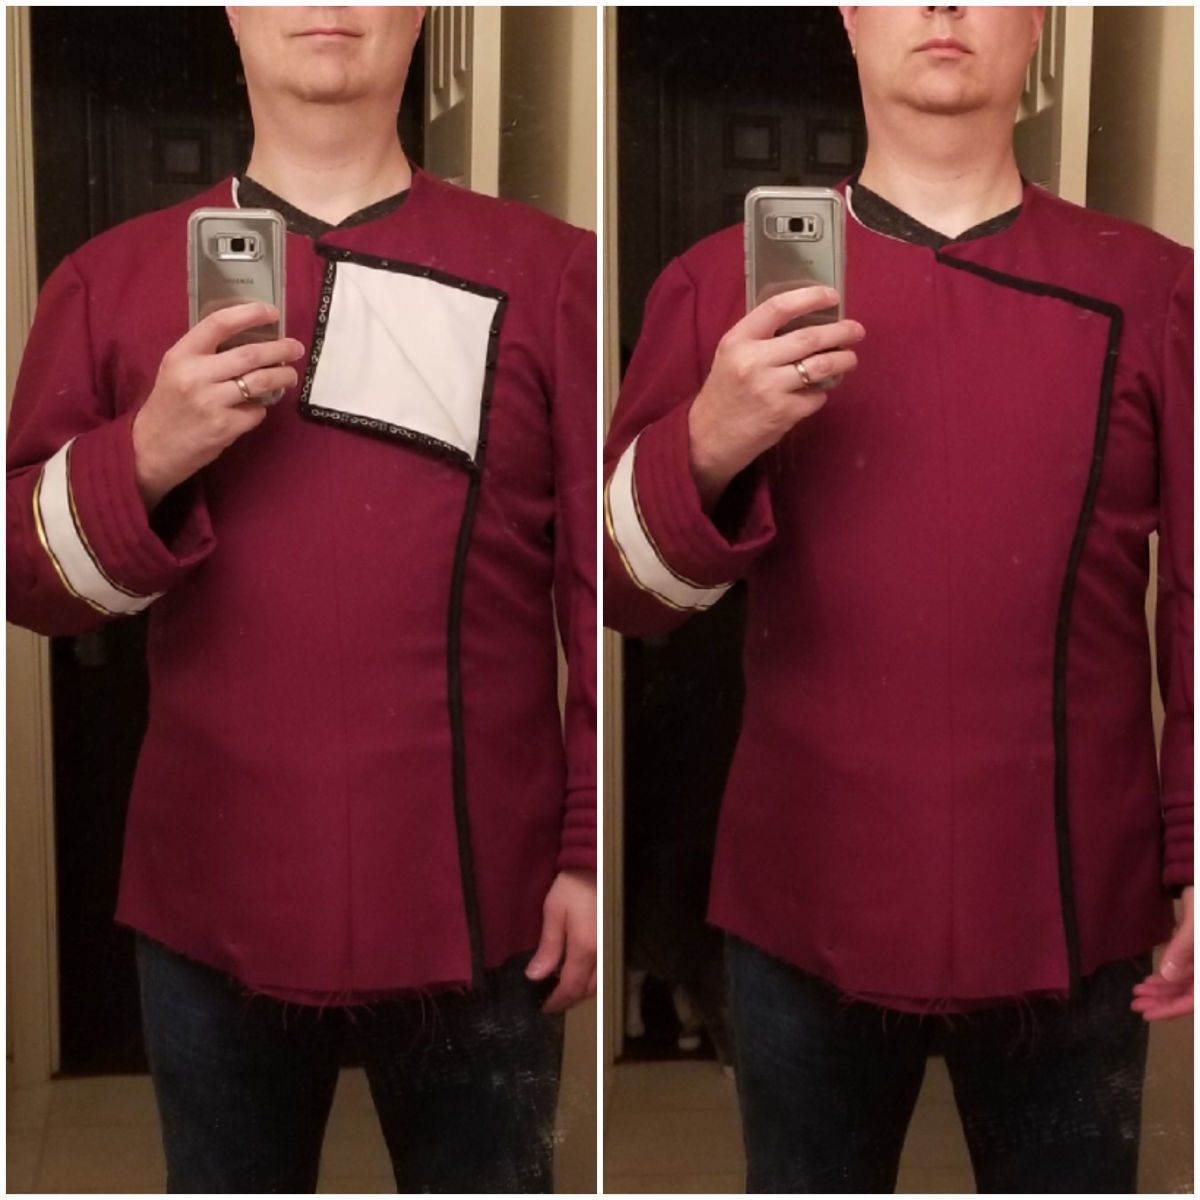 September 28, 2019: The front jacket flap is complete